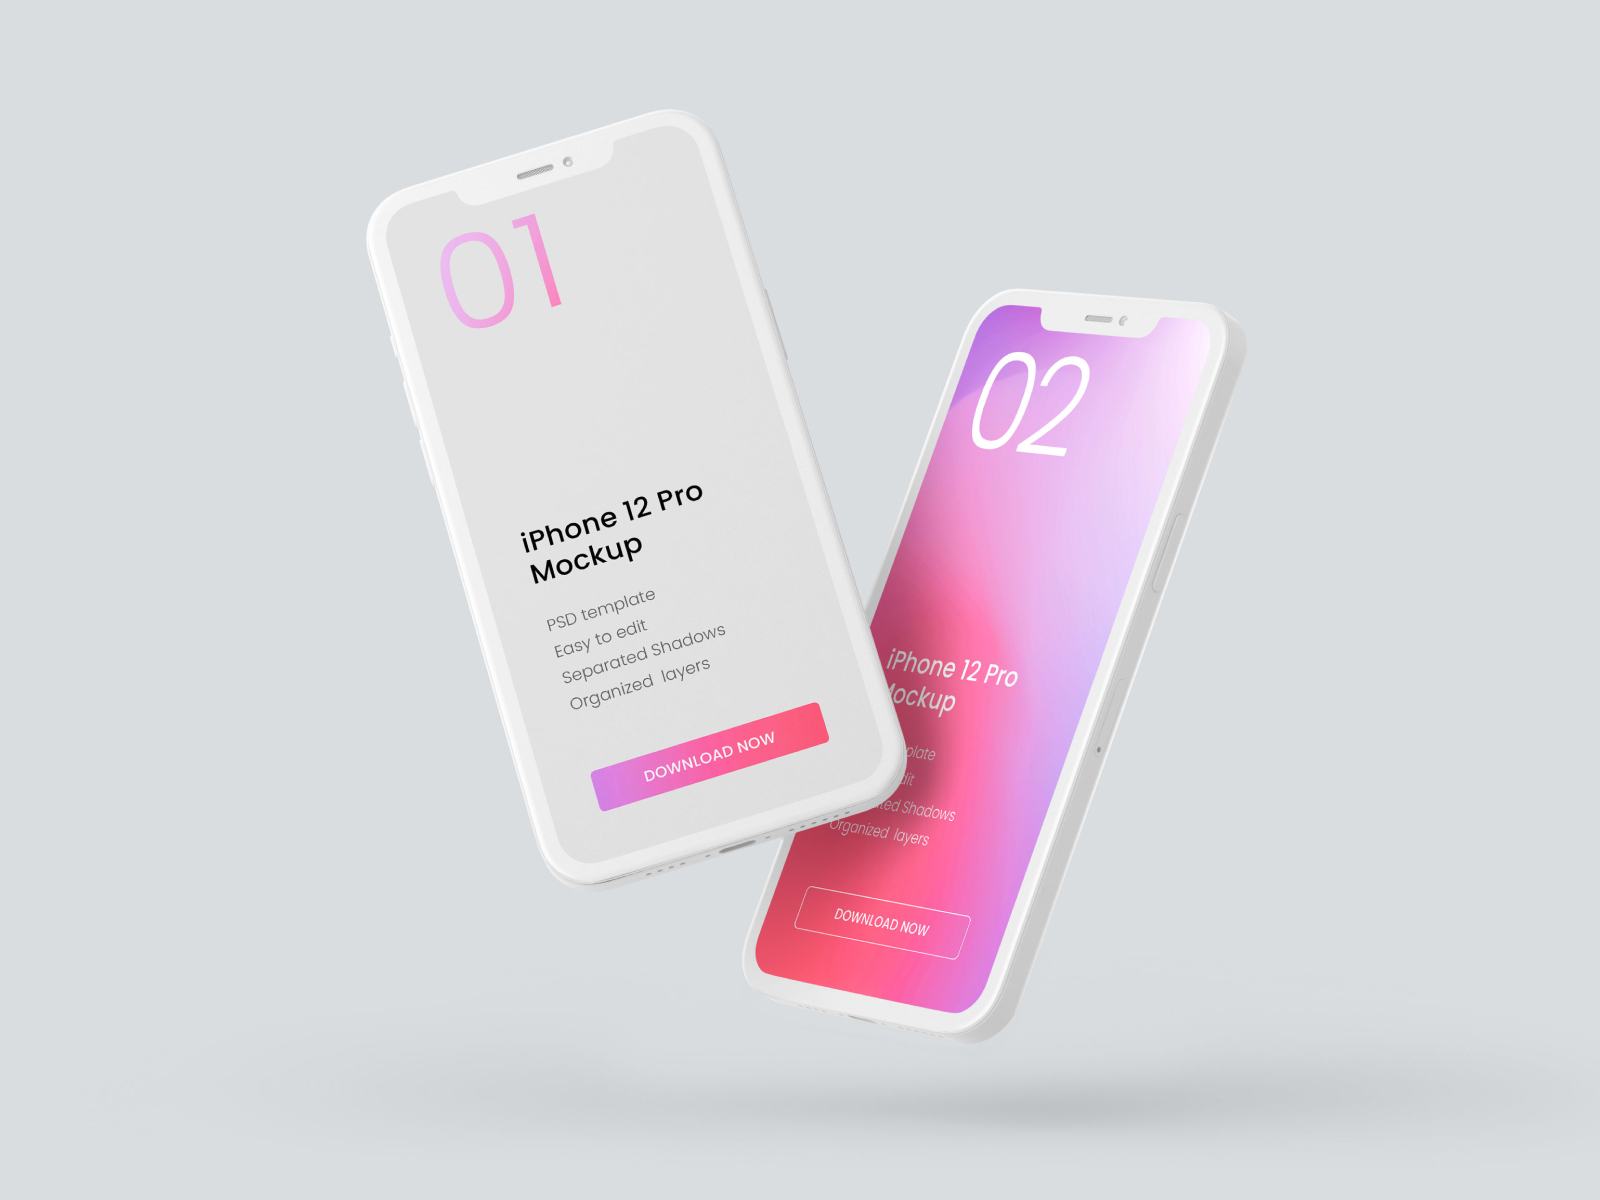 Download iPhone 12 Pro Clay Mockup Set by Deeplab Studio on Dribbble